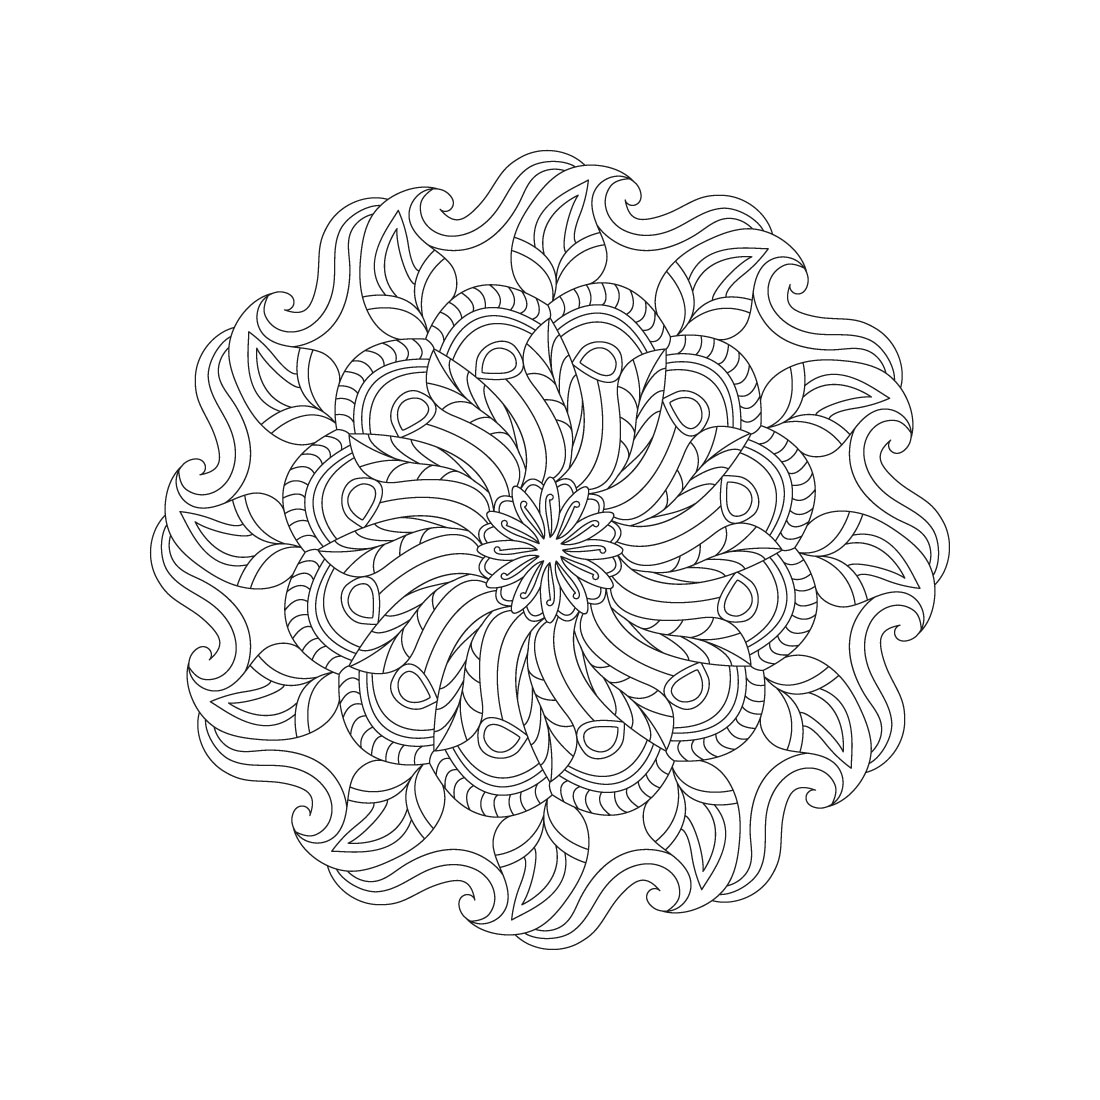 Bundle of 10 Radiant Spirals Mandala Coloring Book Pages preview image.